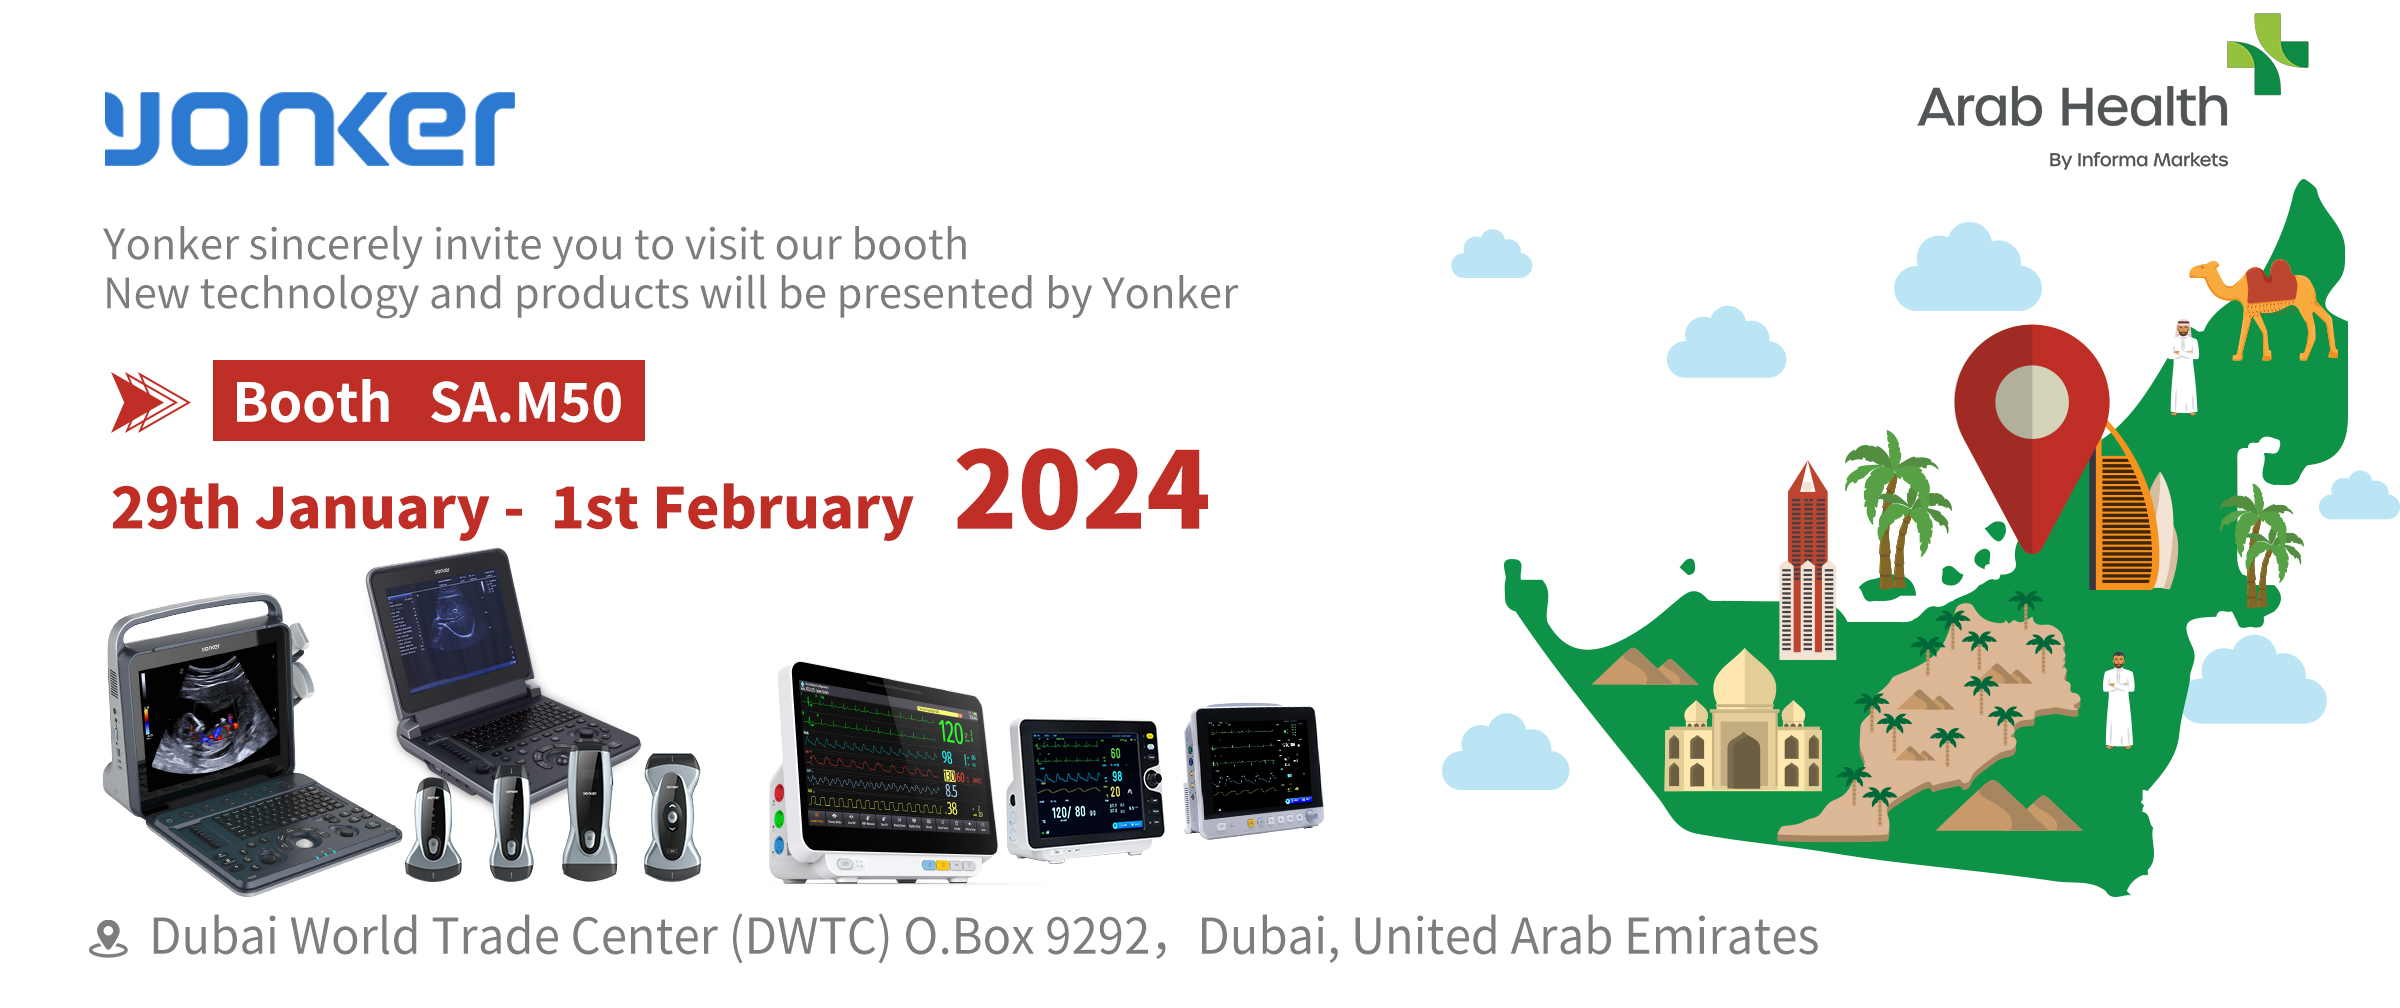 Yonkermed is set to participate in the 2024 Dubai Arab Health Exhibition 